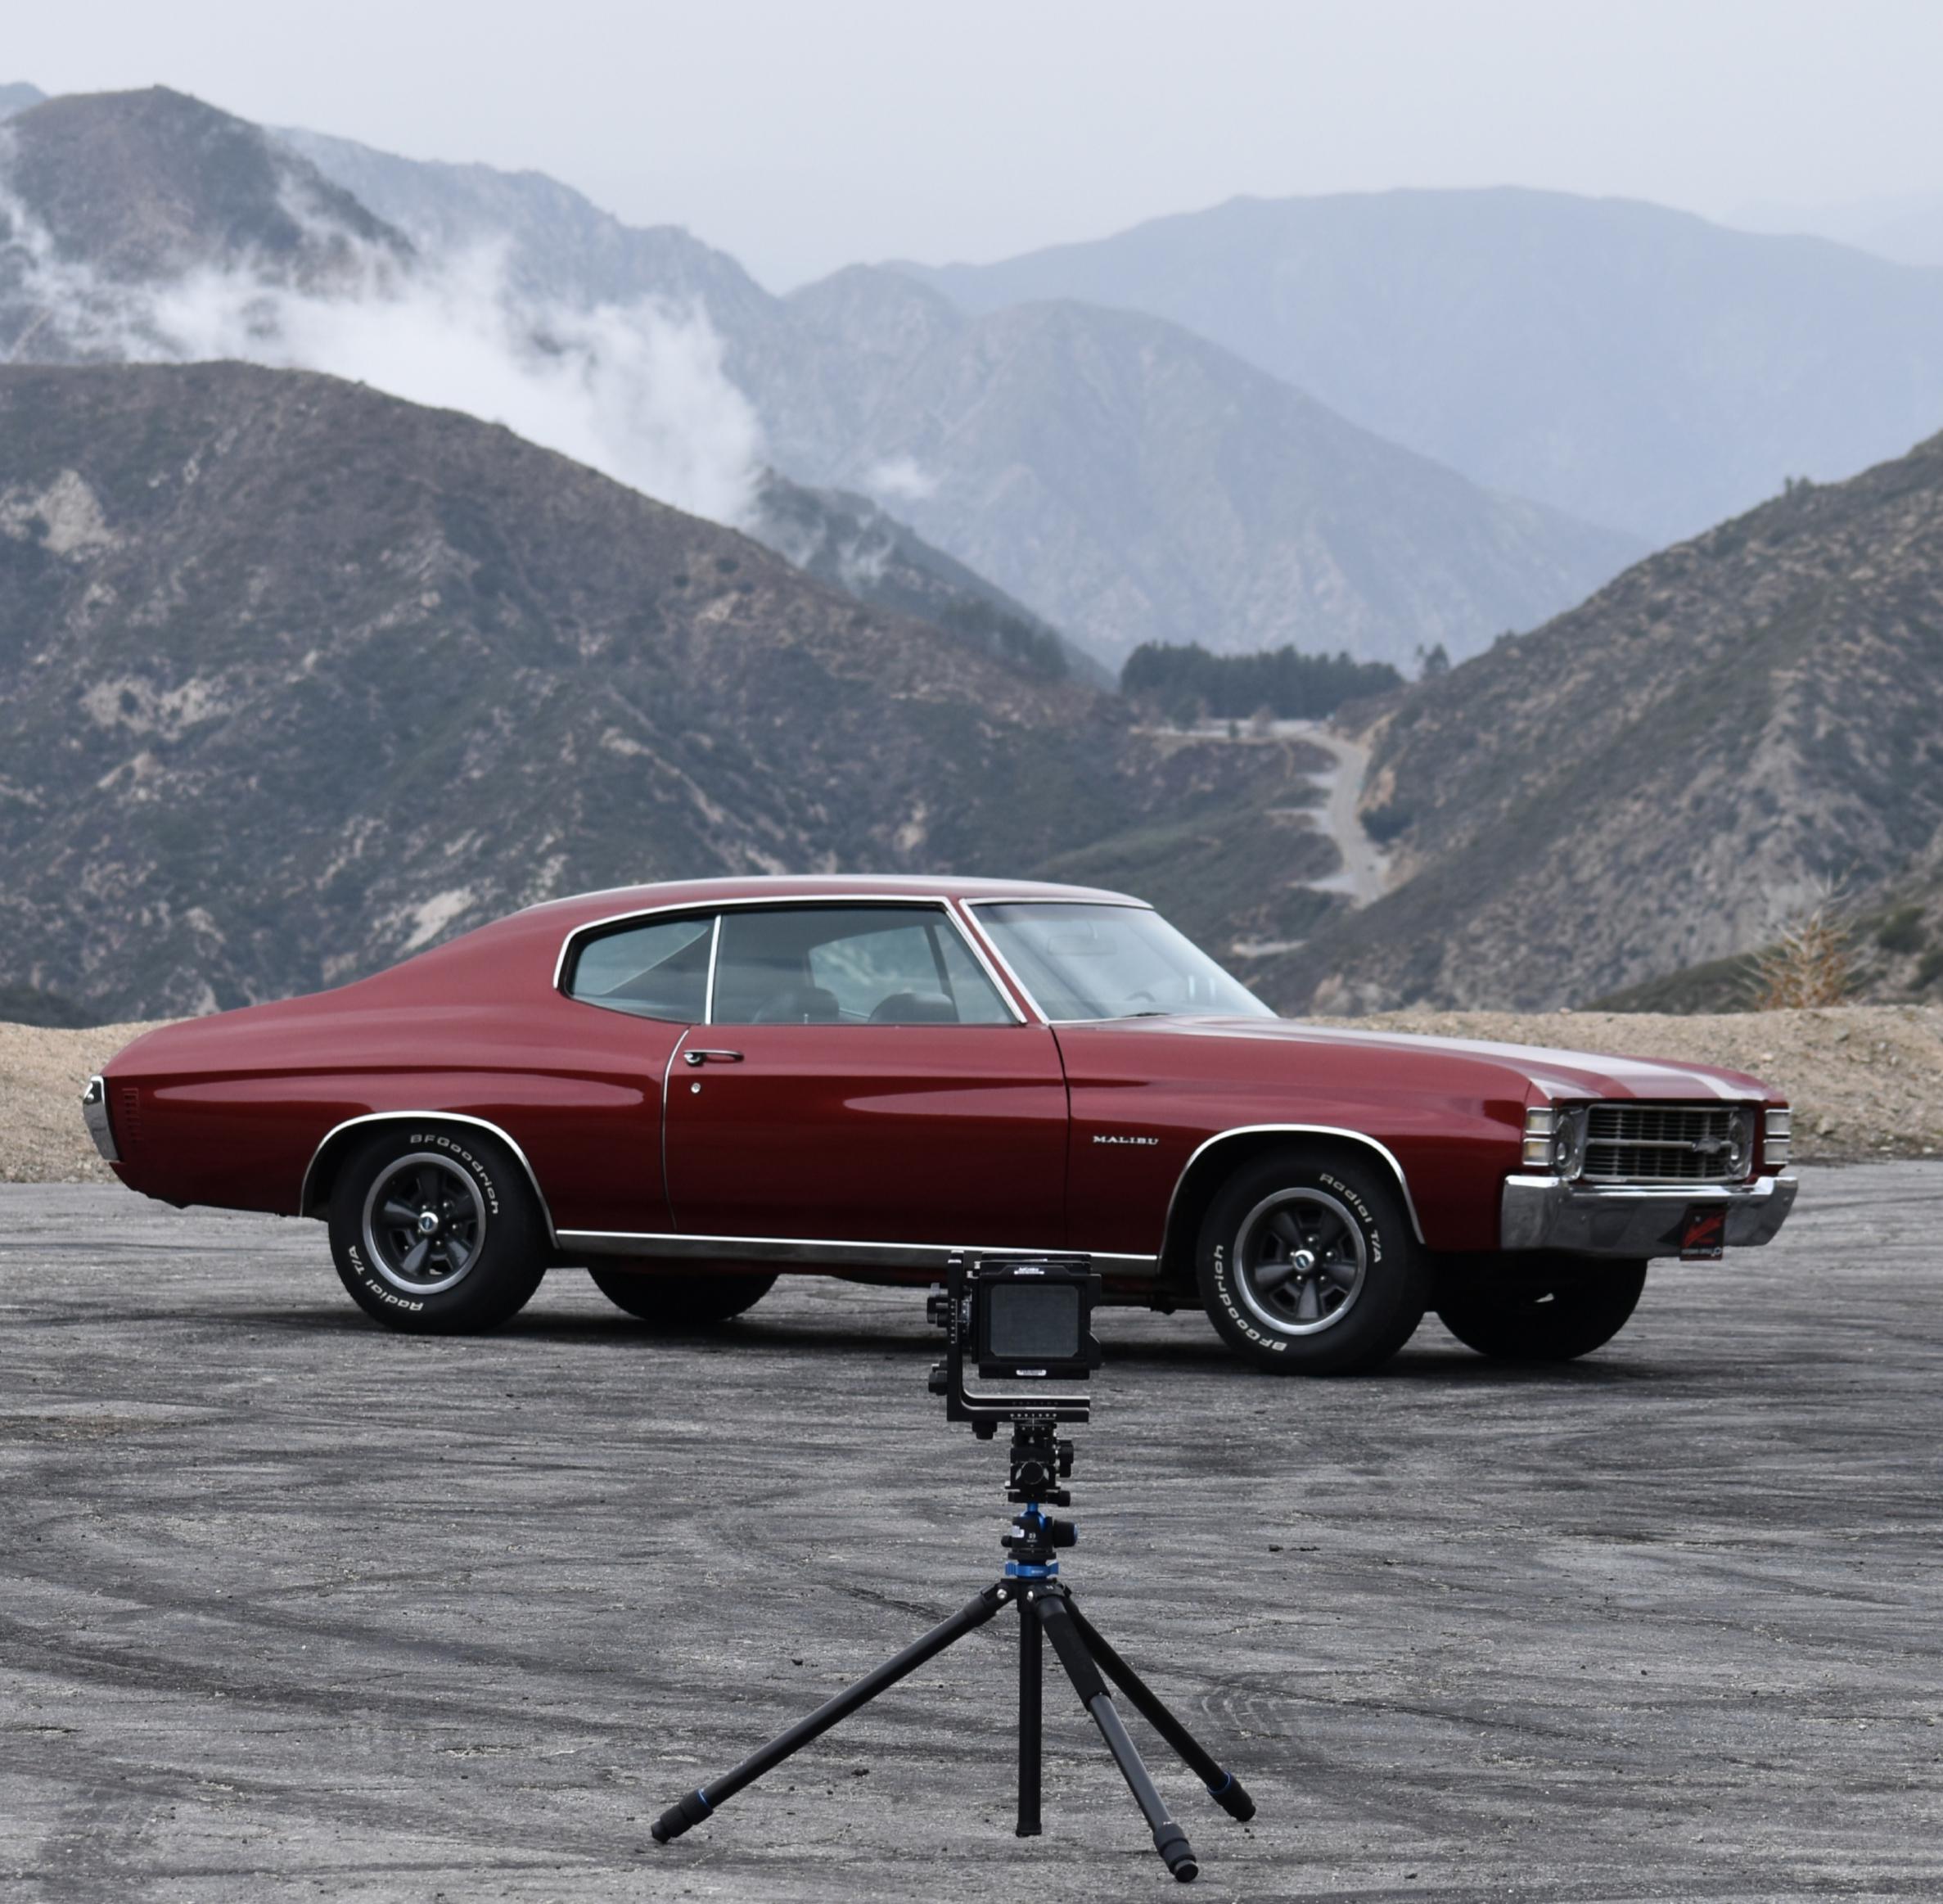 @Chevellecruiser is pretty popular with the old school methods out on the Angeles Crest Highway! Good old 71′ Chevelle